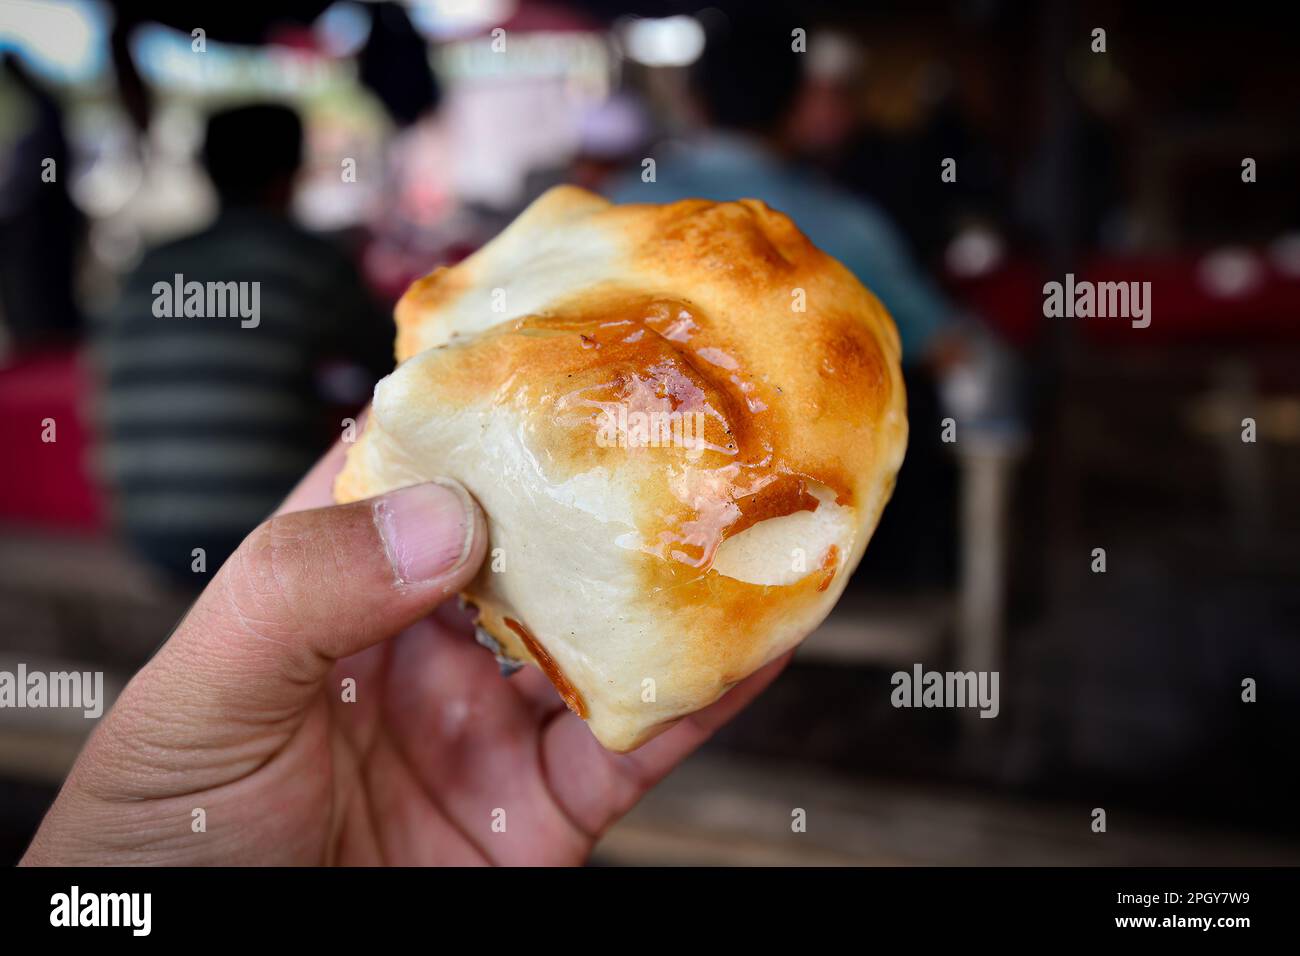 Mutton baked buns in Kashgar, Xinjiang is a delicious local snack Stock Photo